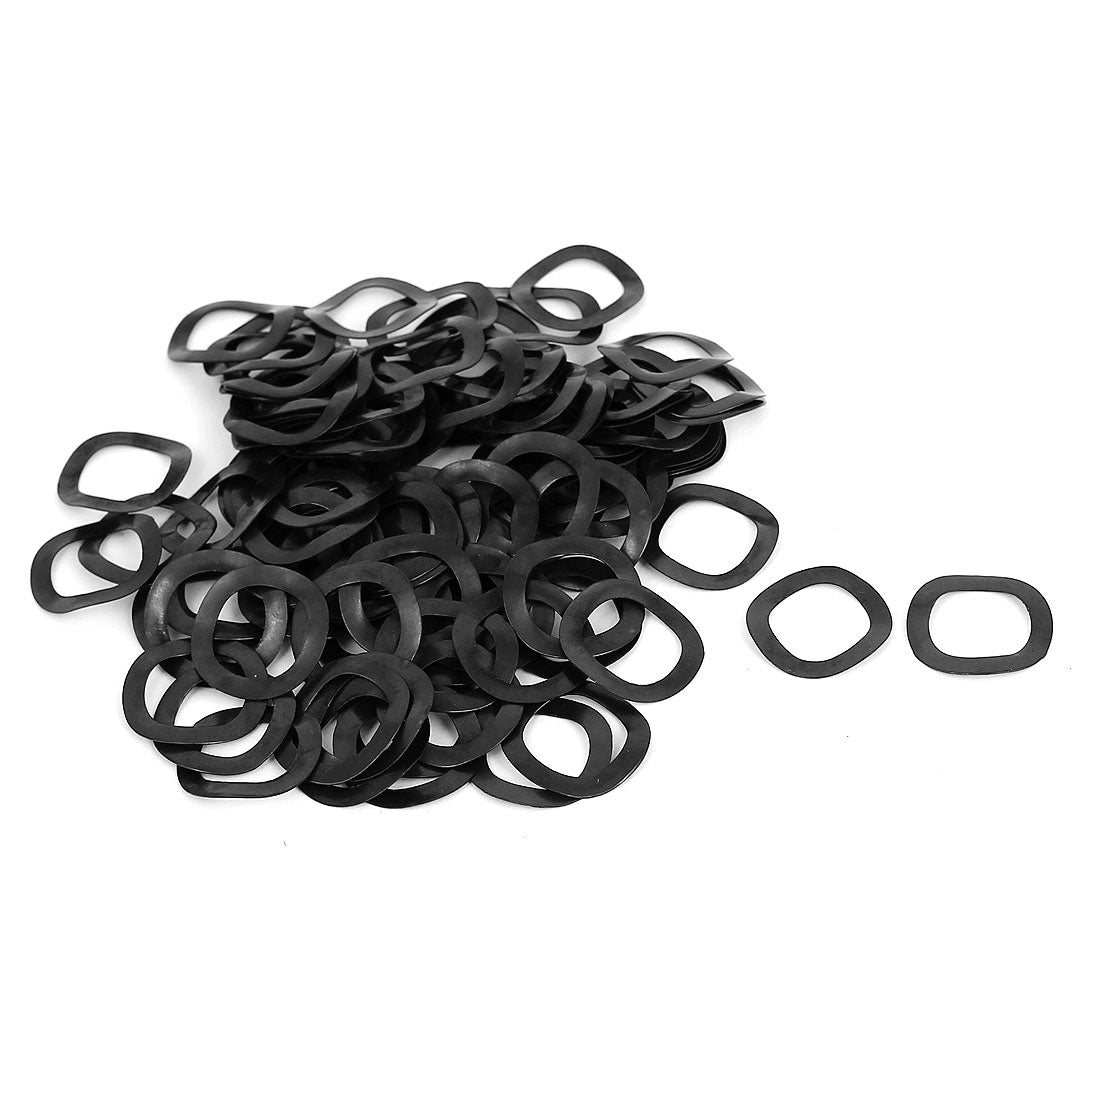 uxcell Uxcell 100pcs Black Metal Wavy Wave Crinkle Spring Washers 14mm x 21mm x 0.3mm